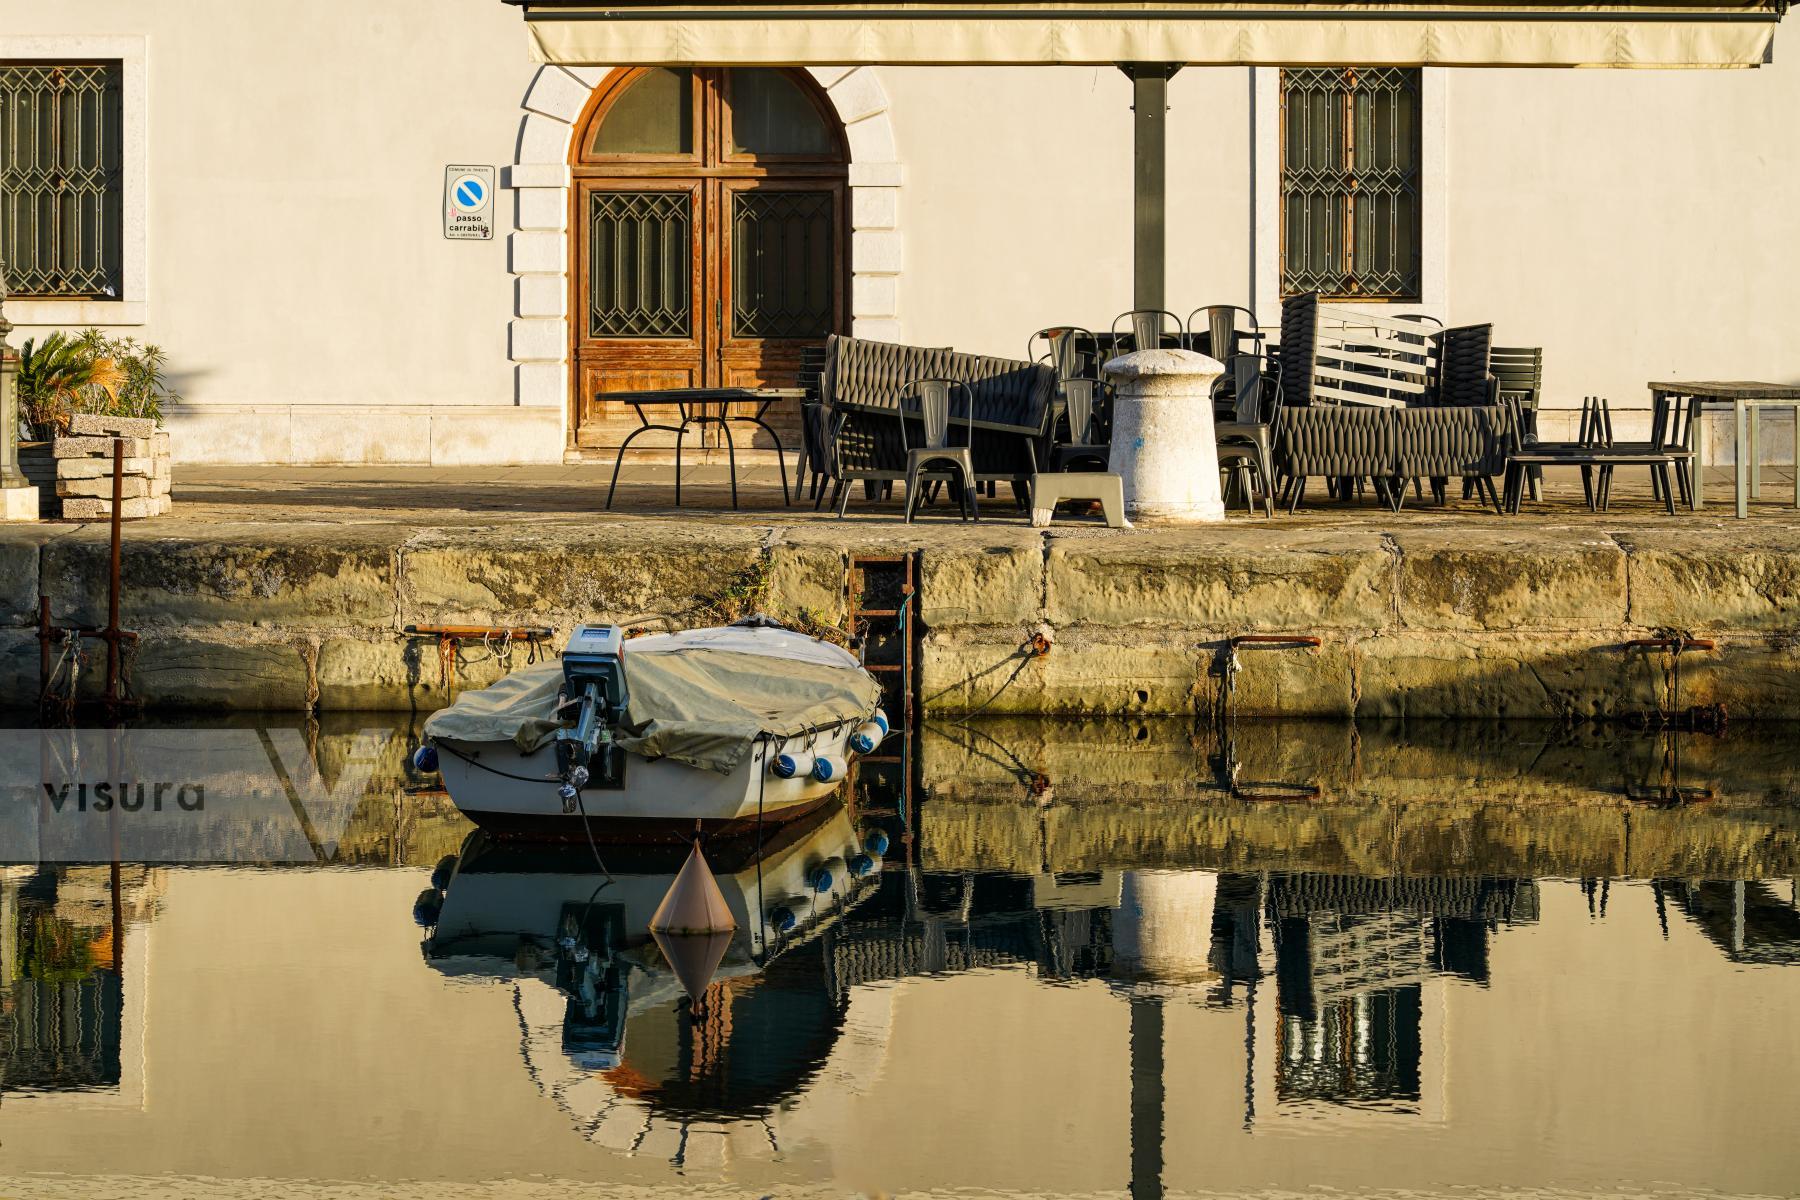 Purchase Morning Atmosphere in Trieste: Dawn’s Serenity on the Grand Canal by Michael Nguyen